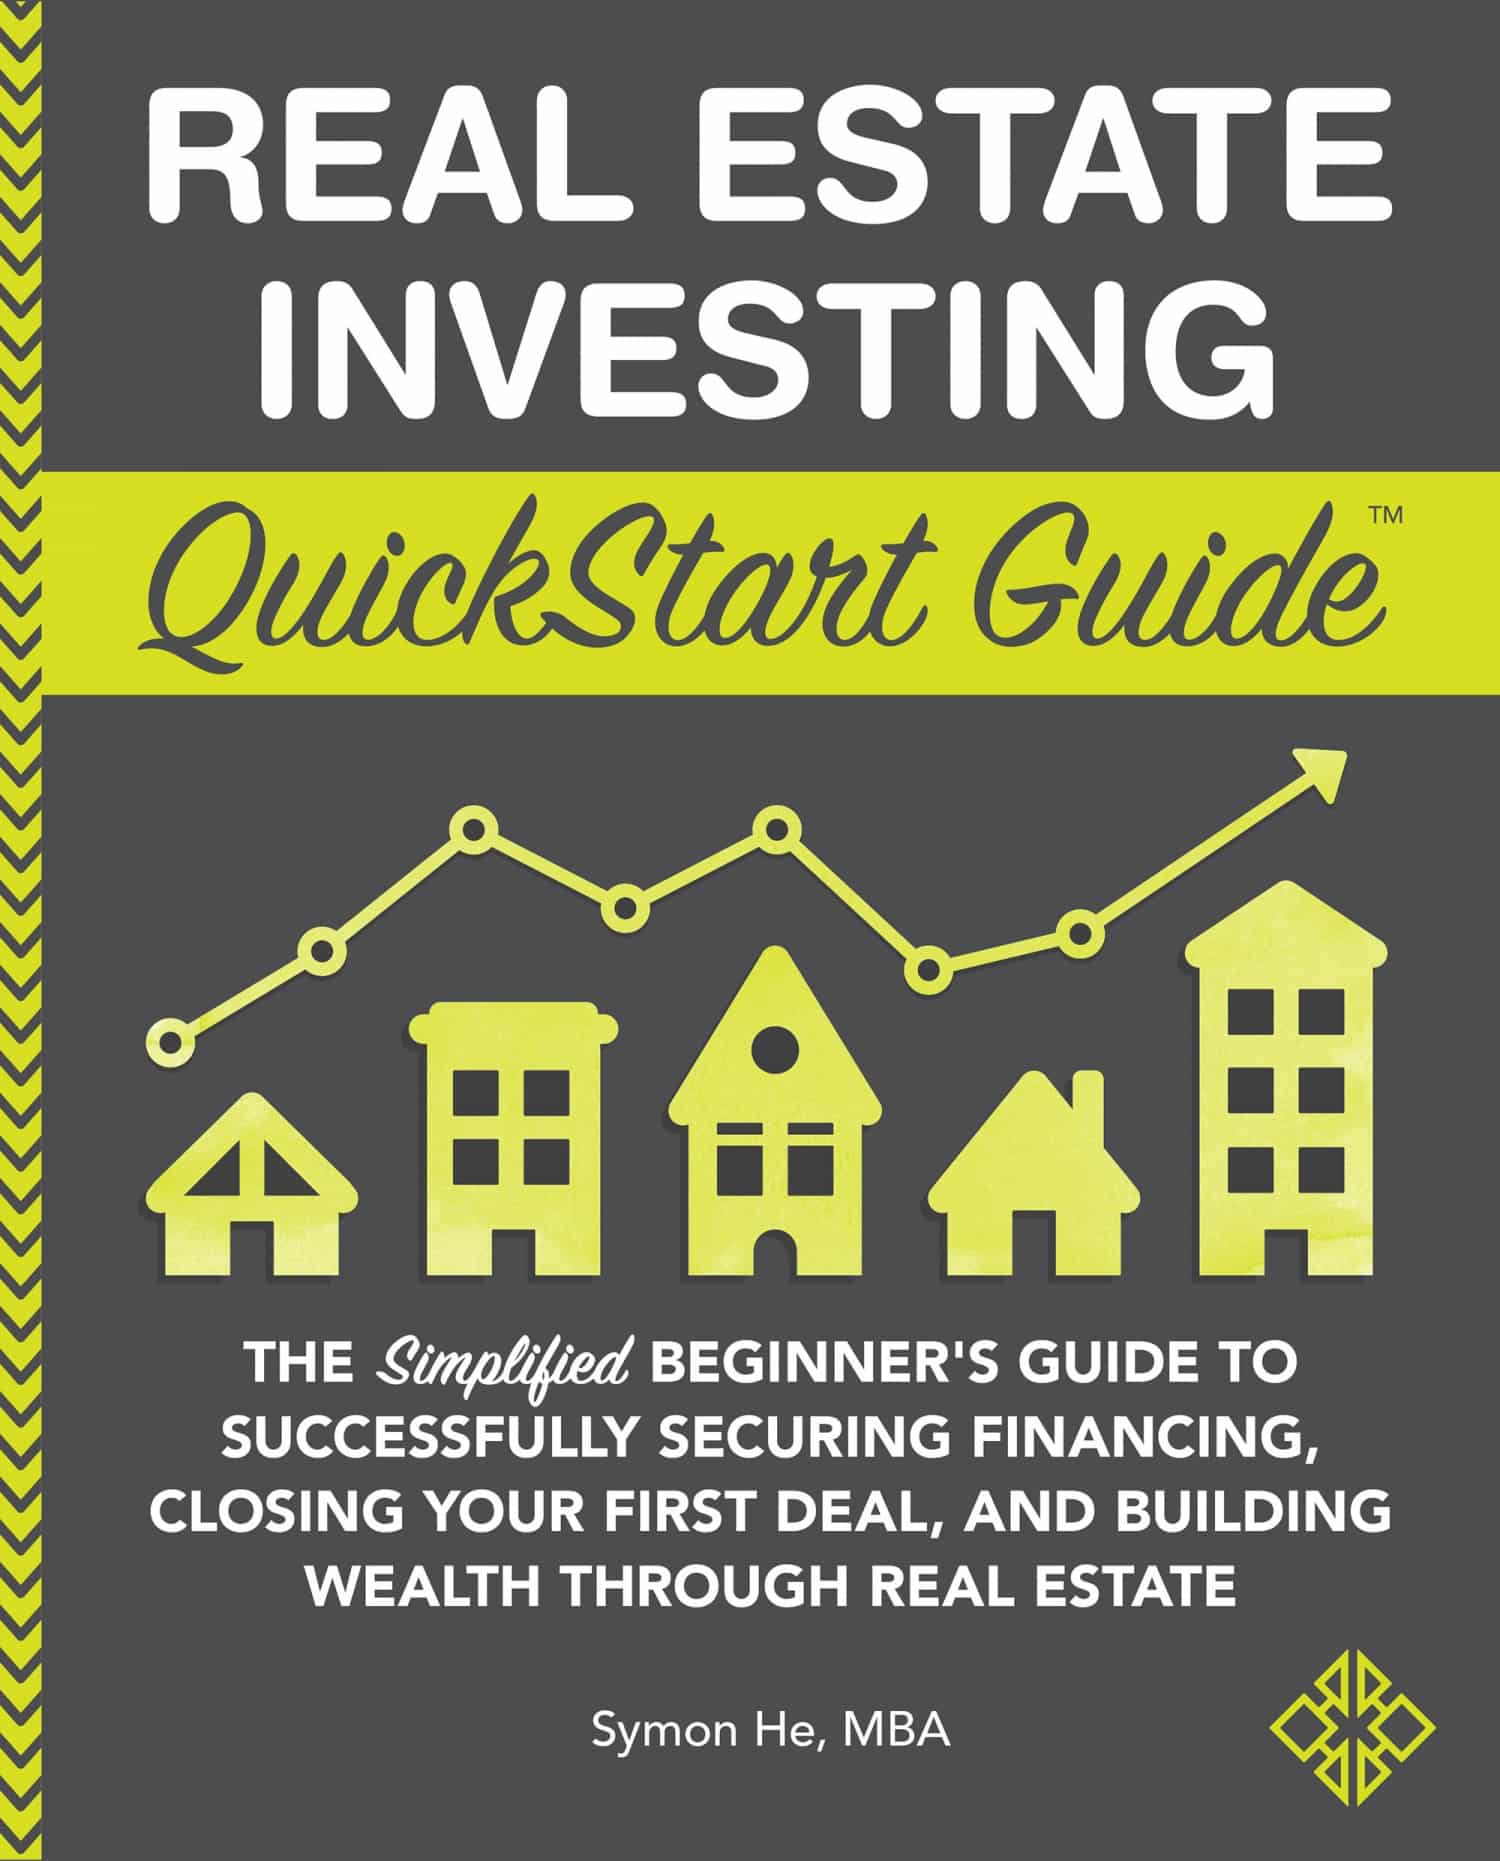 Review of Real Estate Investing QuickStart Guide (9781945051562 ...